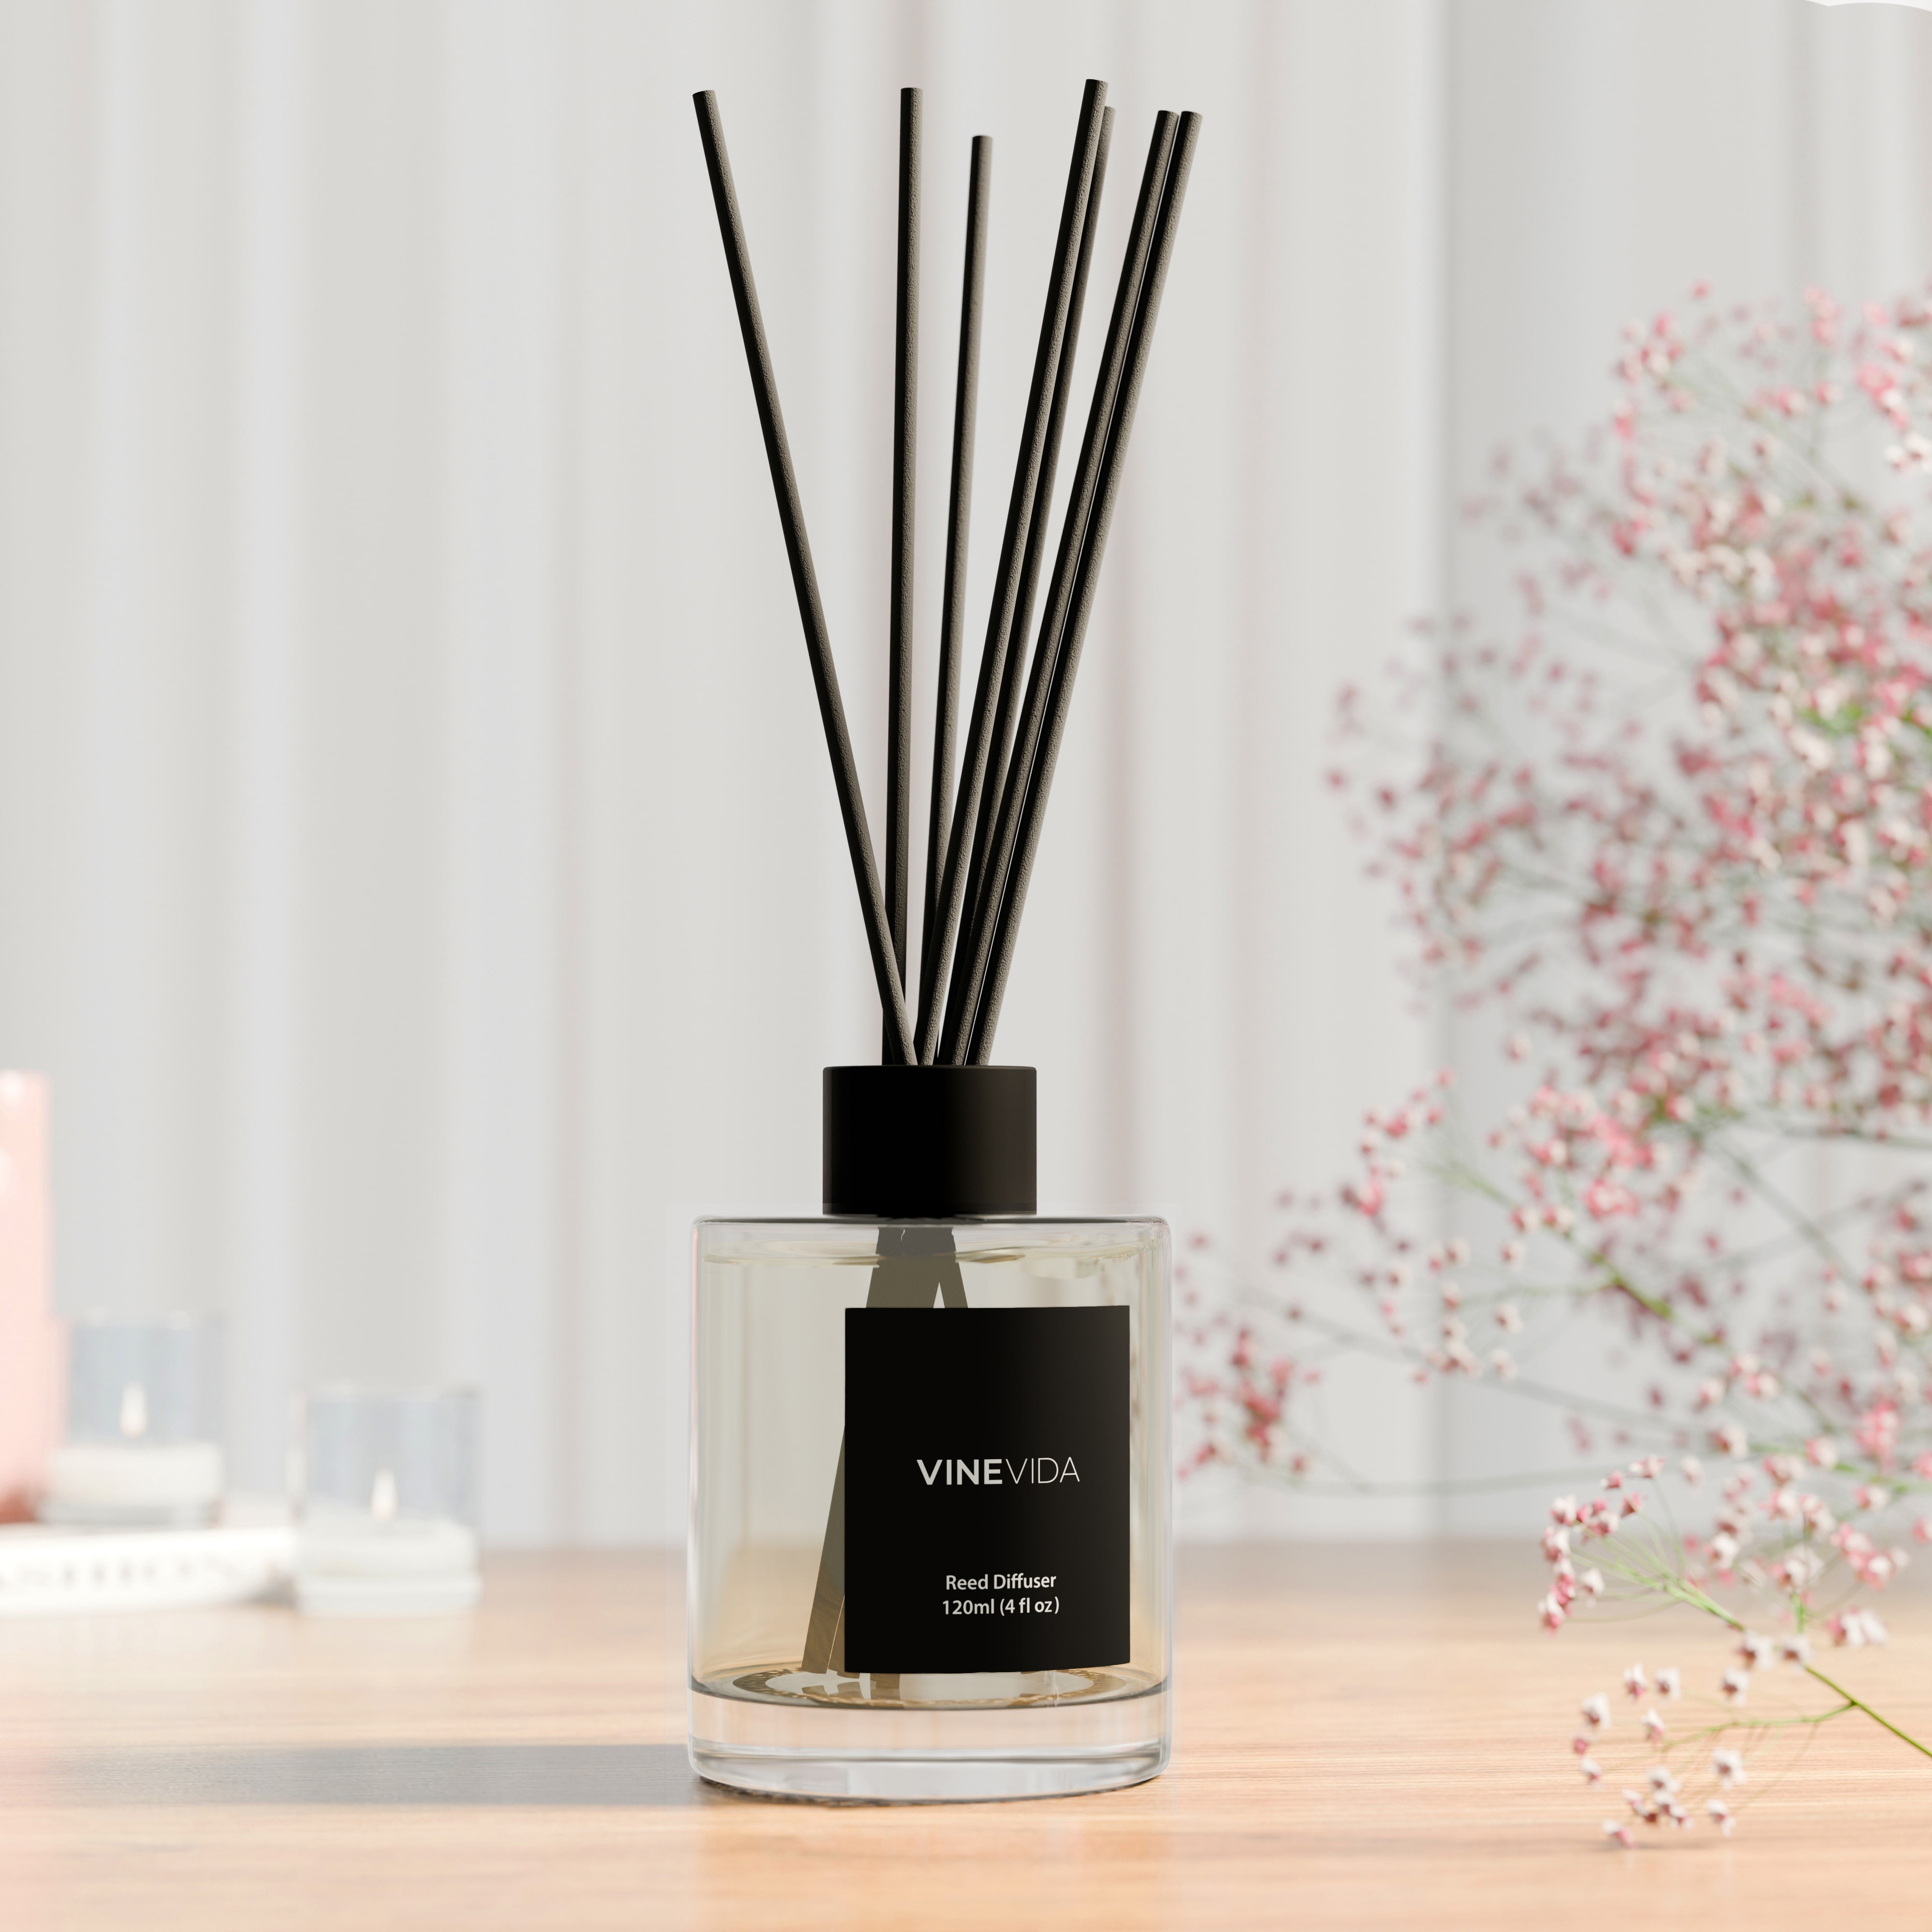 NO. 1305 Reed Diffuser - Inspired by: The Noir 29 by Le Labo